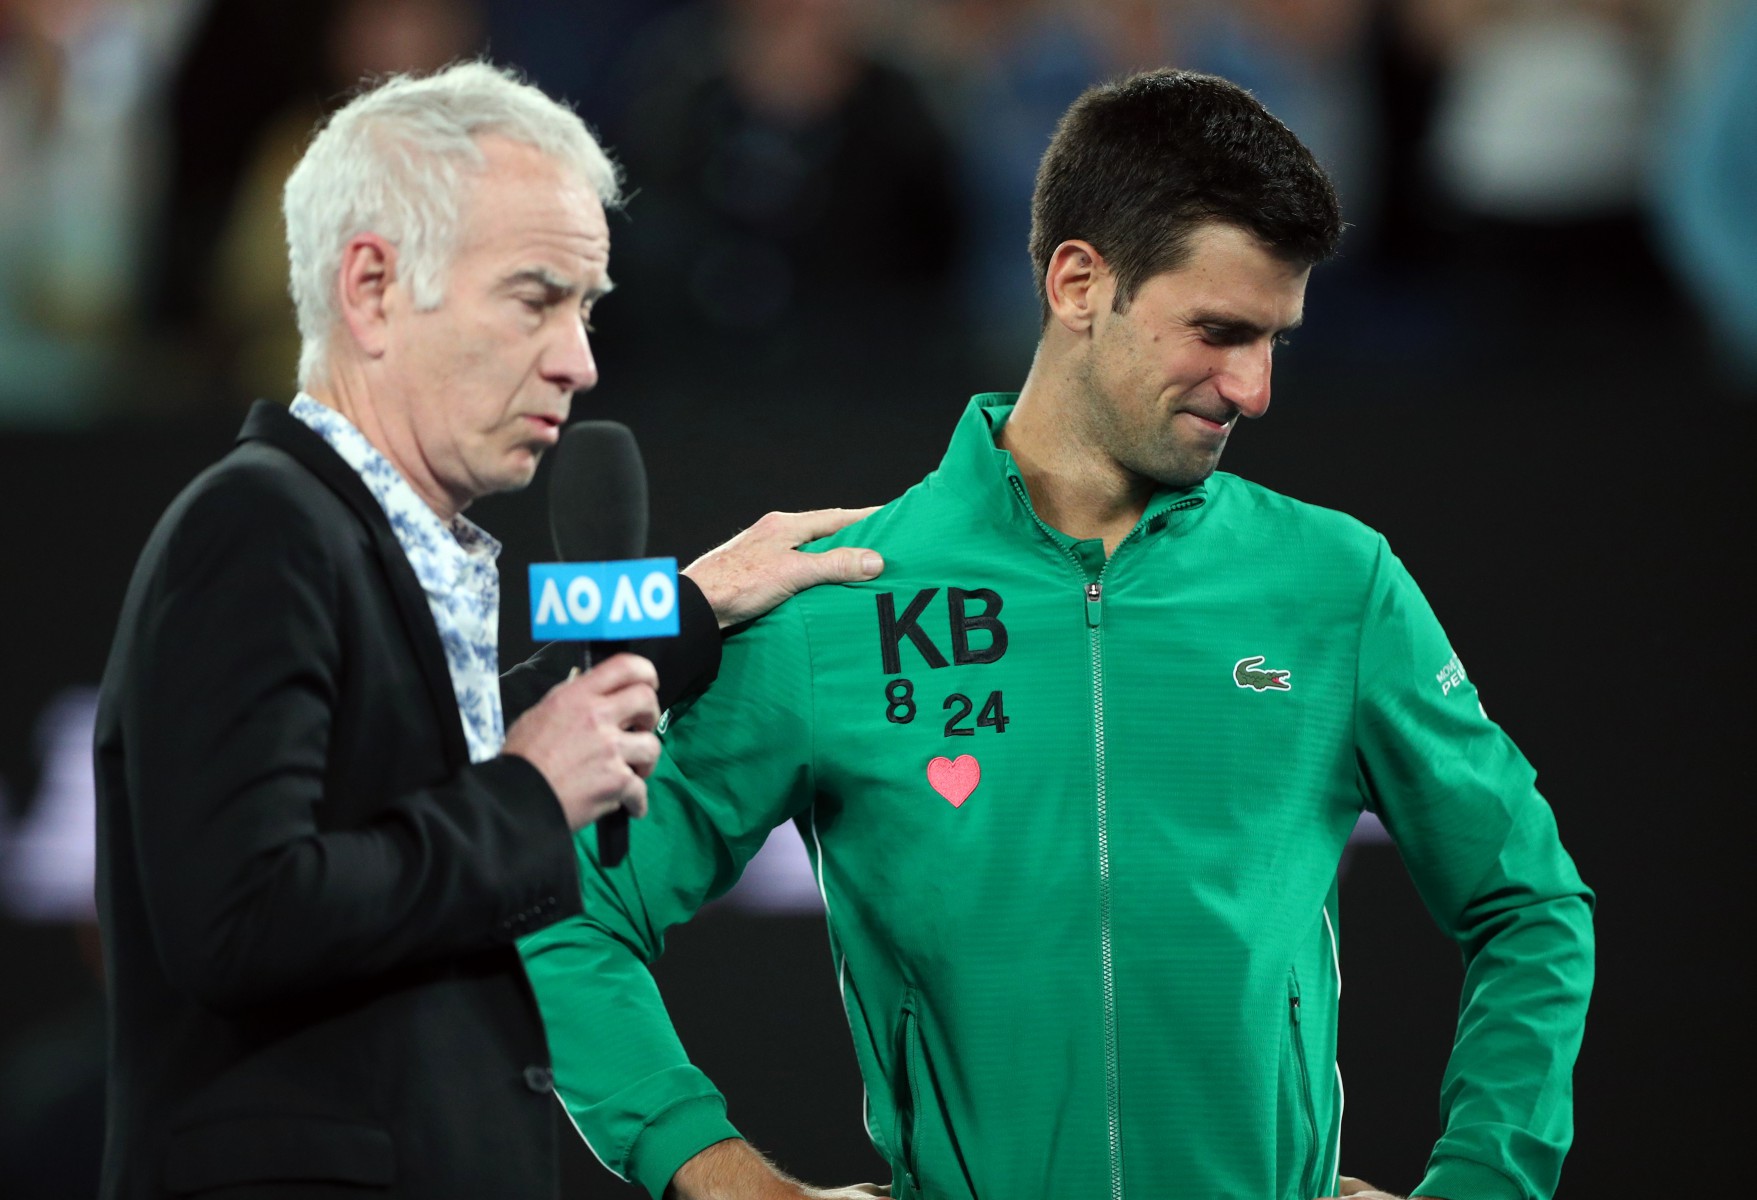 He was consoled by John McEnroe who conducted the post-match interview on Rod Laver Arena